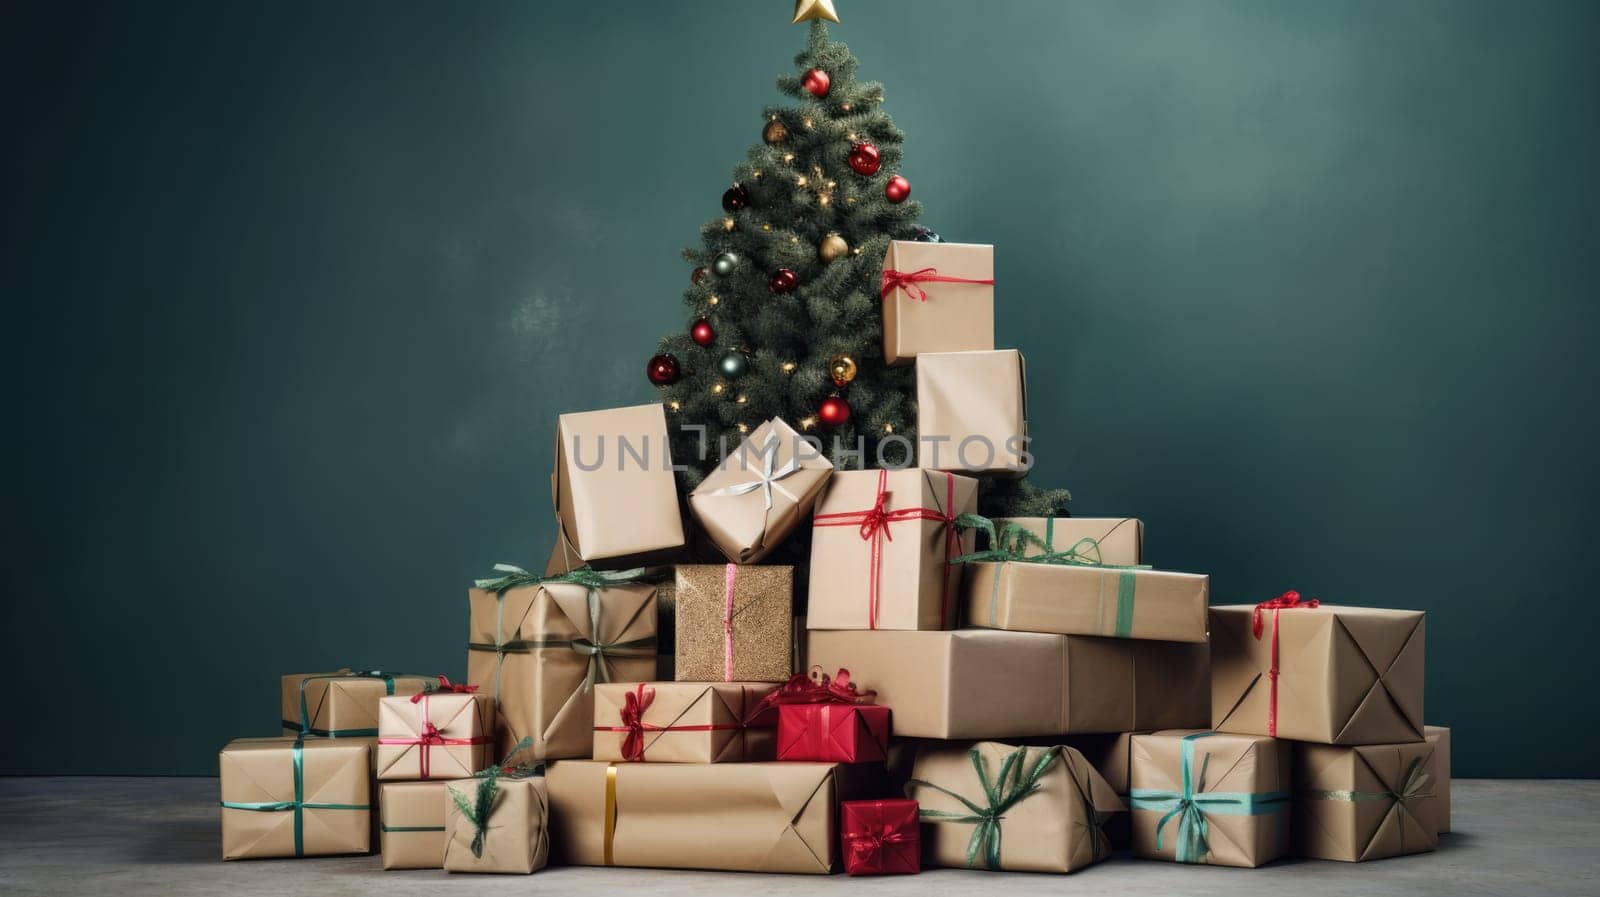 Delivered pile of parcel boxes under Christmas tree. Christmas online shopping. Black Friday sale